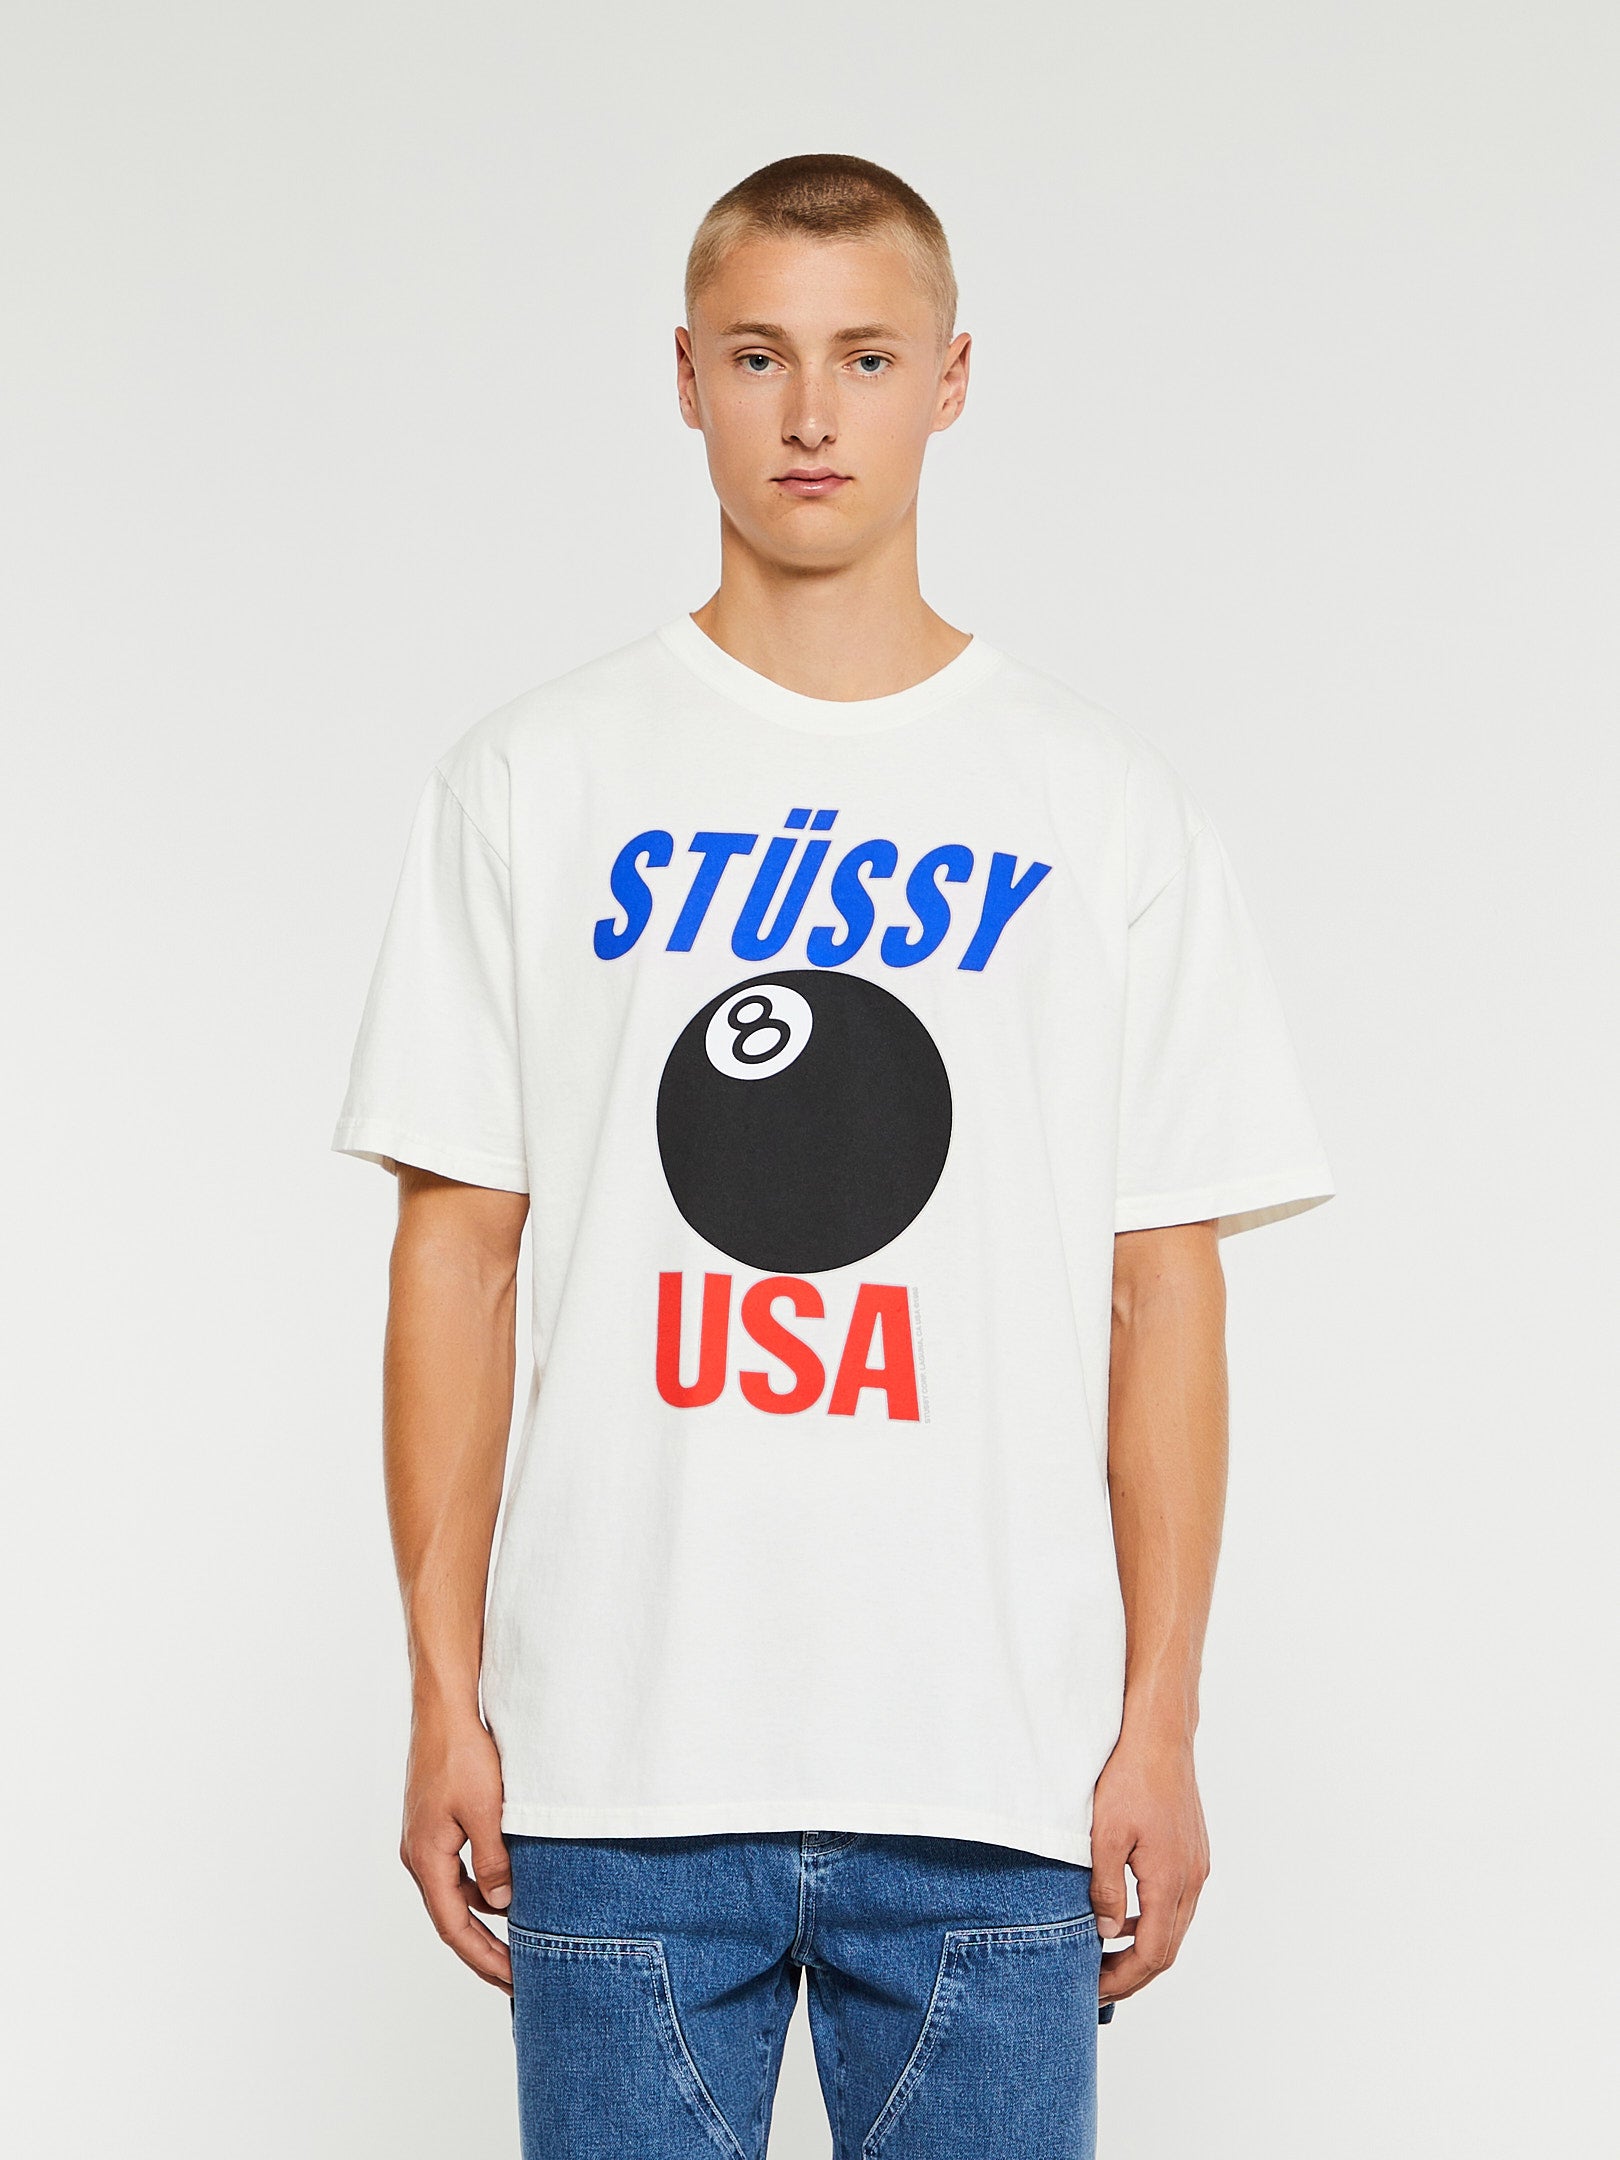 Stüssy - Stüssy USA Pigment Dyed T-Shirt in Natural